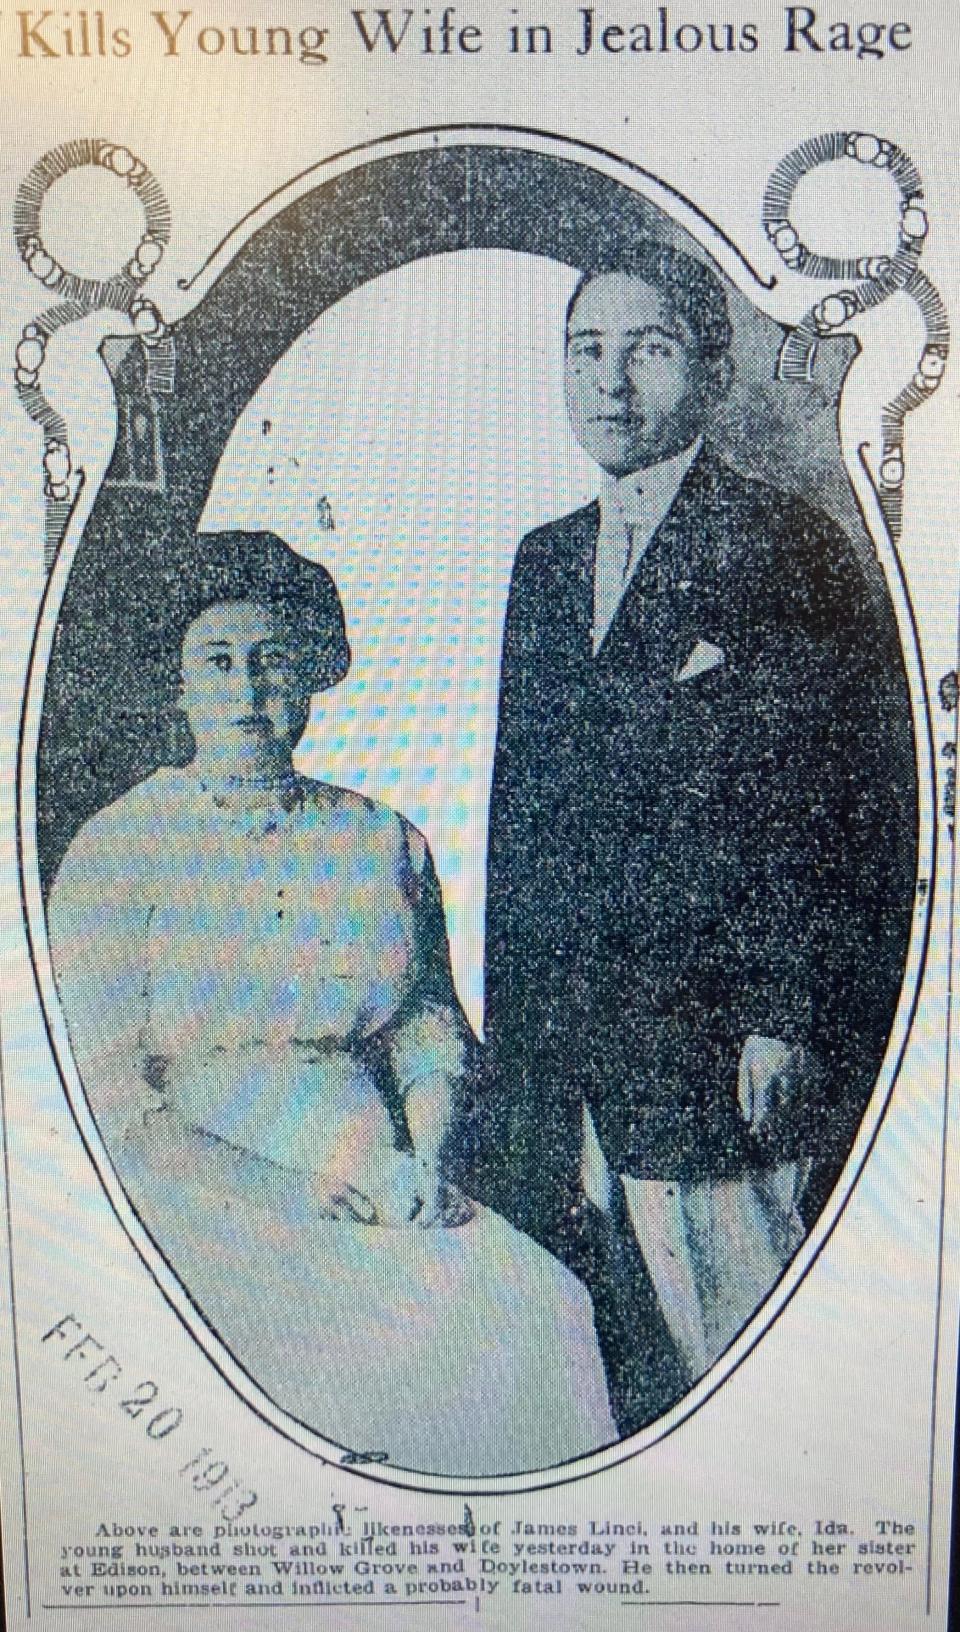 James Linzi, with wife Ida. Linzi was a bigamist who murdered Ida and unsuccessfully tried to kill himself, but survived. When he was nursed back to health, he was tried and convicted of his wife's murder and hanged on July 1, 1914. He was the last man hanged by a gallows shared by Bucks and Northampton counties.